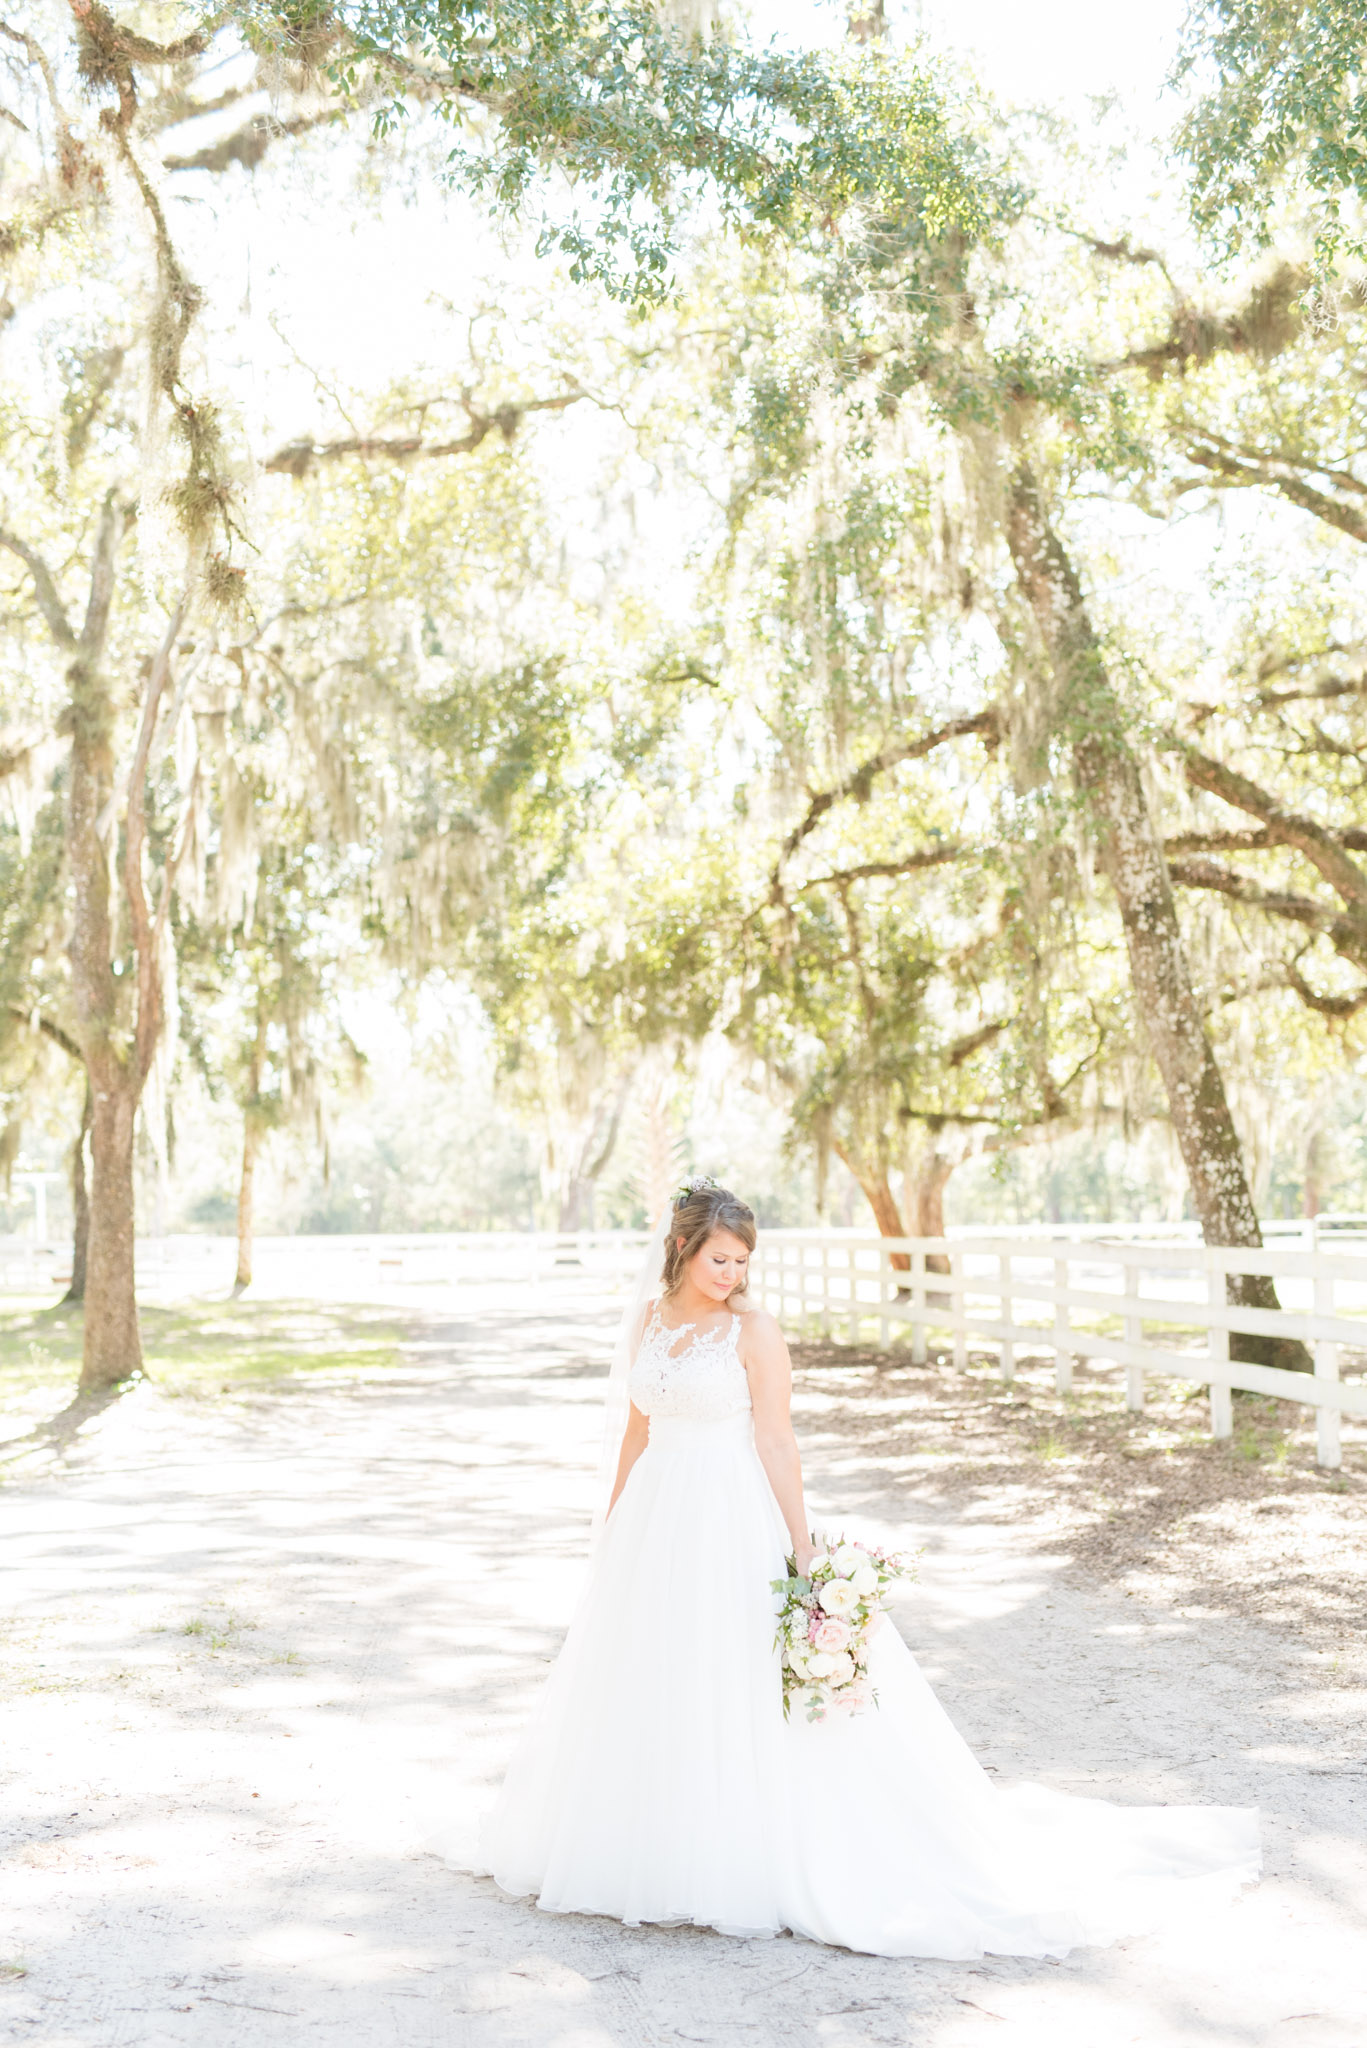 Bride stands on path with oak trees.